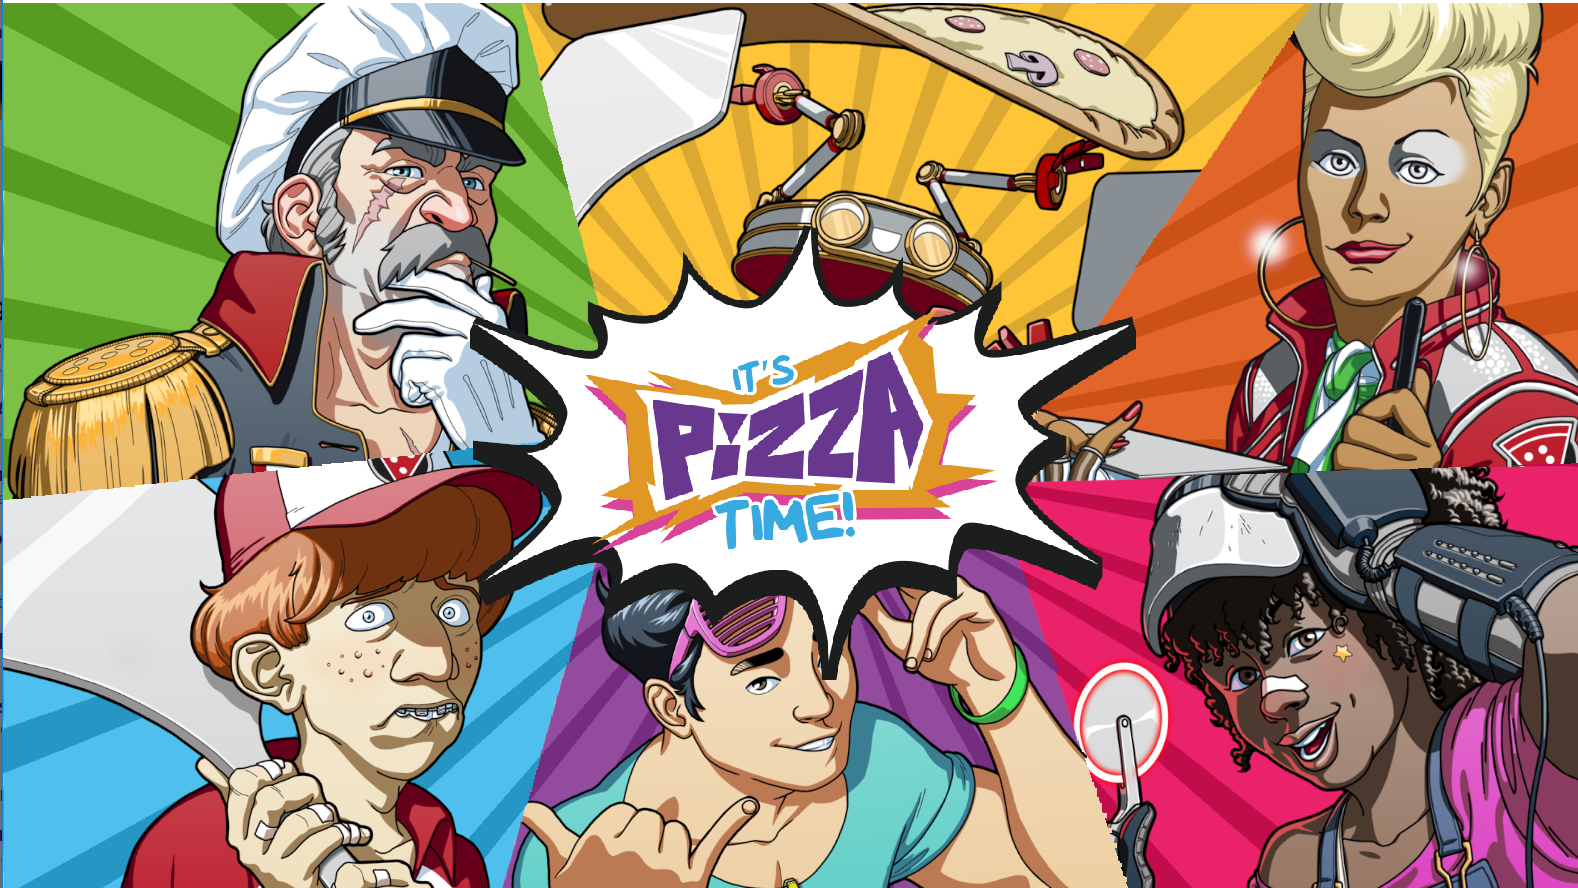 You Should Play This Game About Piloting Mechs To Deliver Pizzas